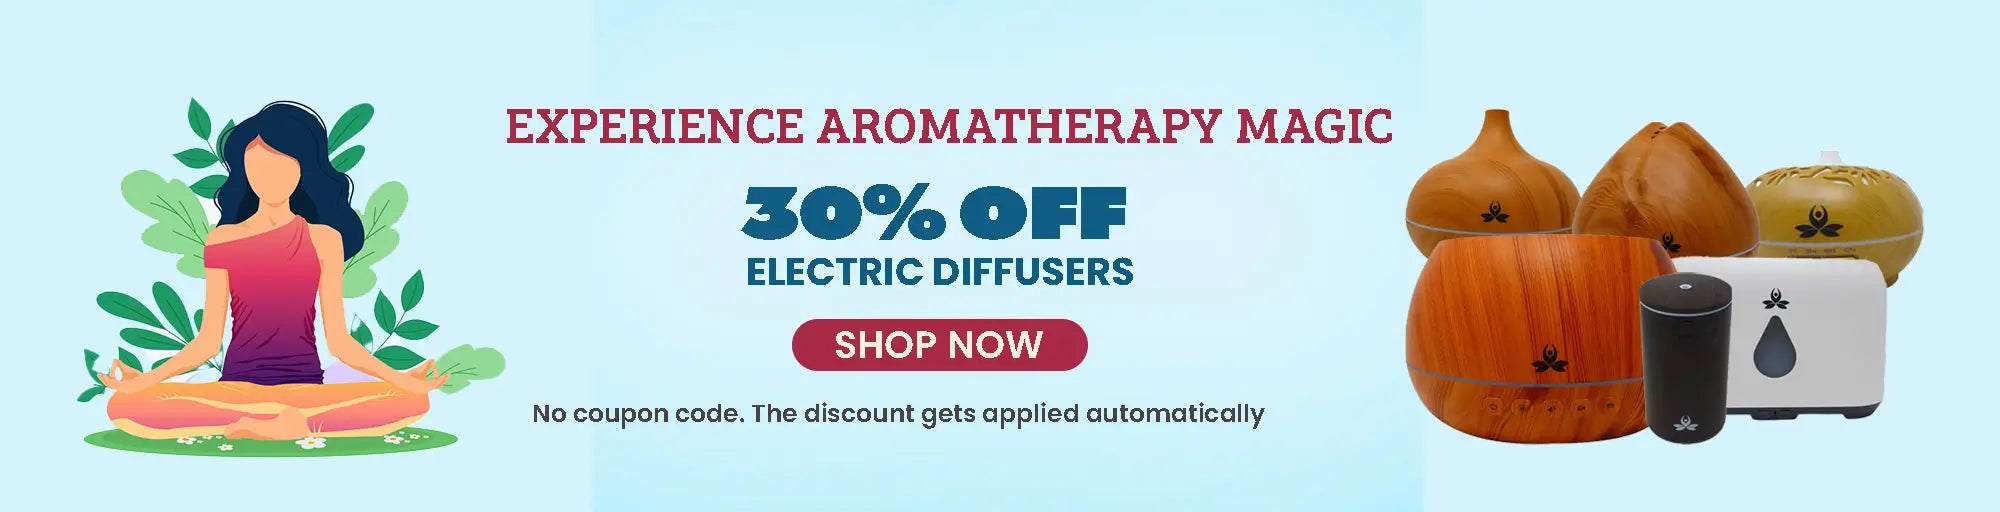 Save 30% off on Electric Diffusers